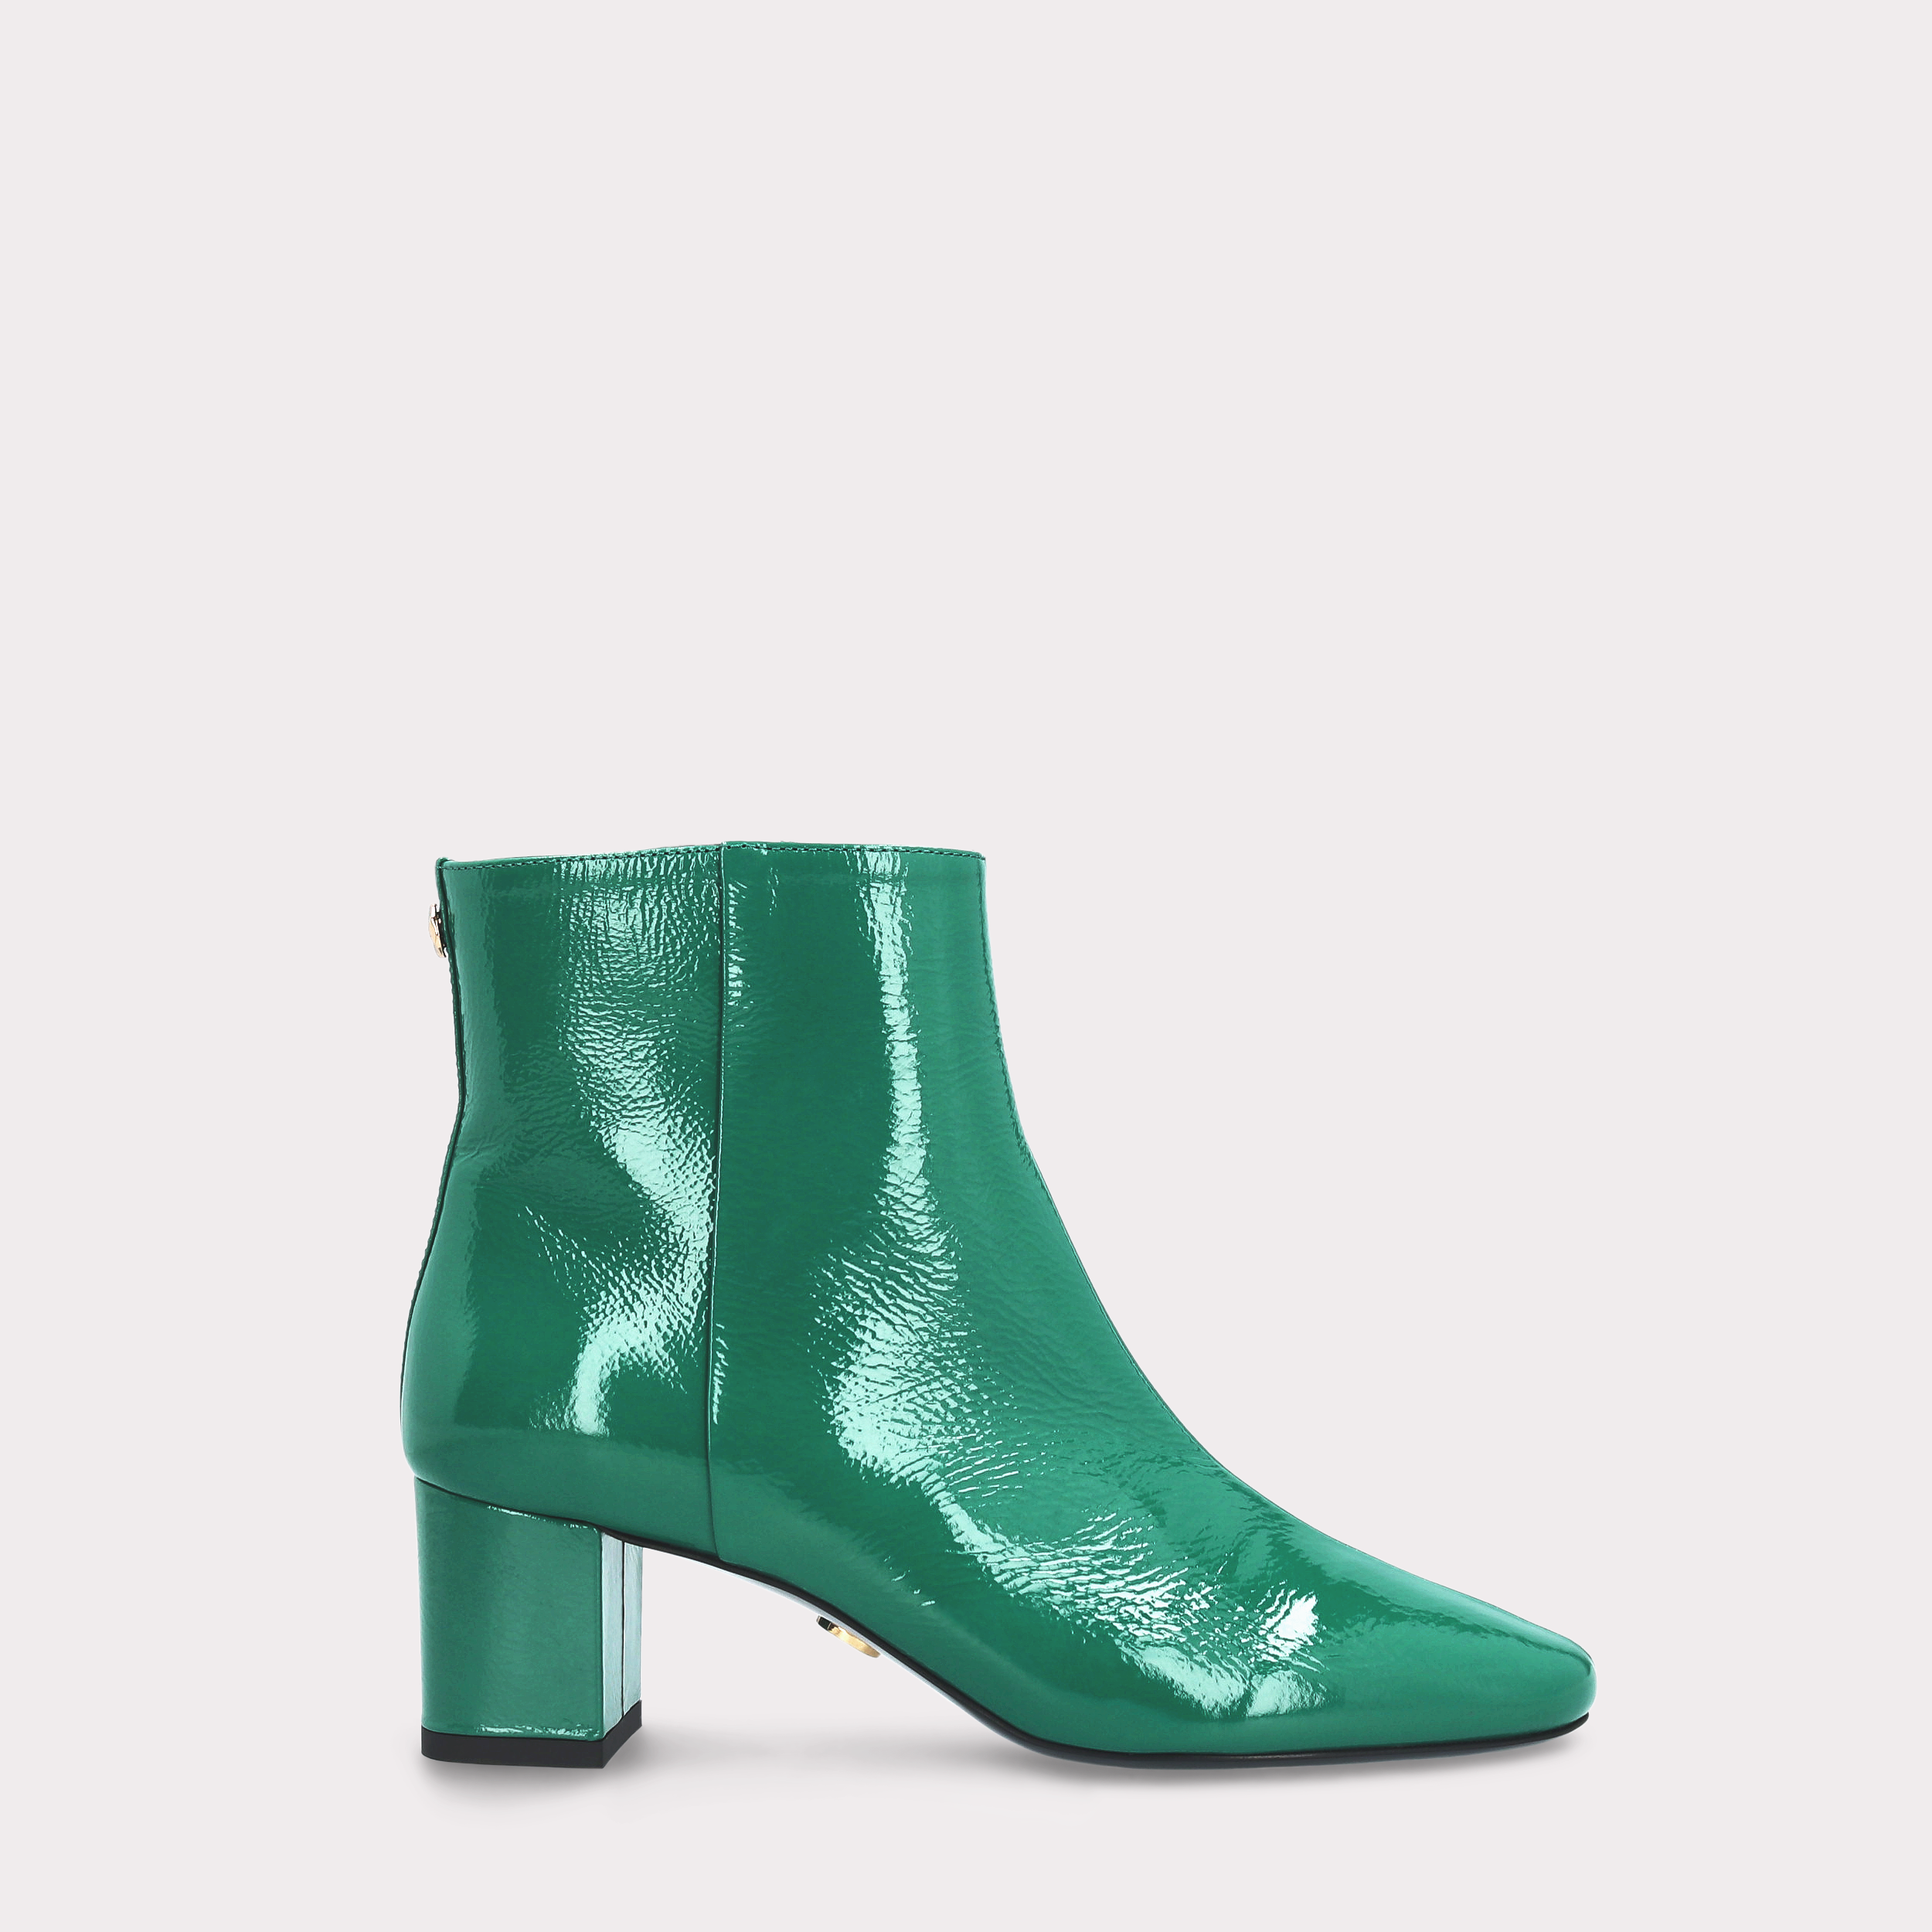 DEBBY GREEN CRUSHED PATENT LEATHER ANKLE BOOTS